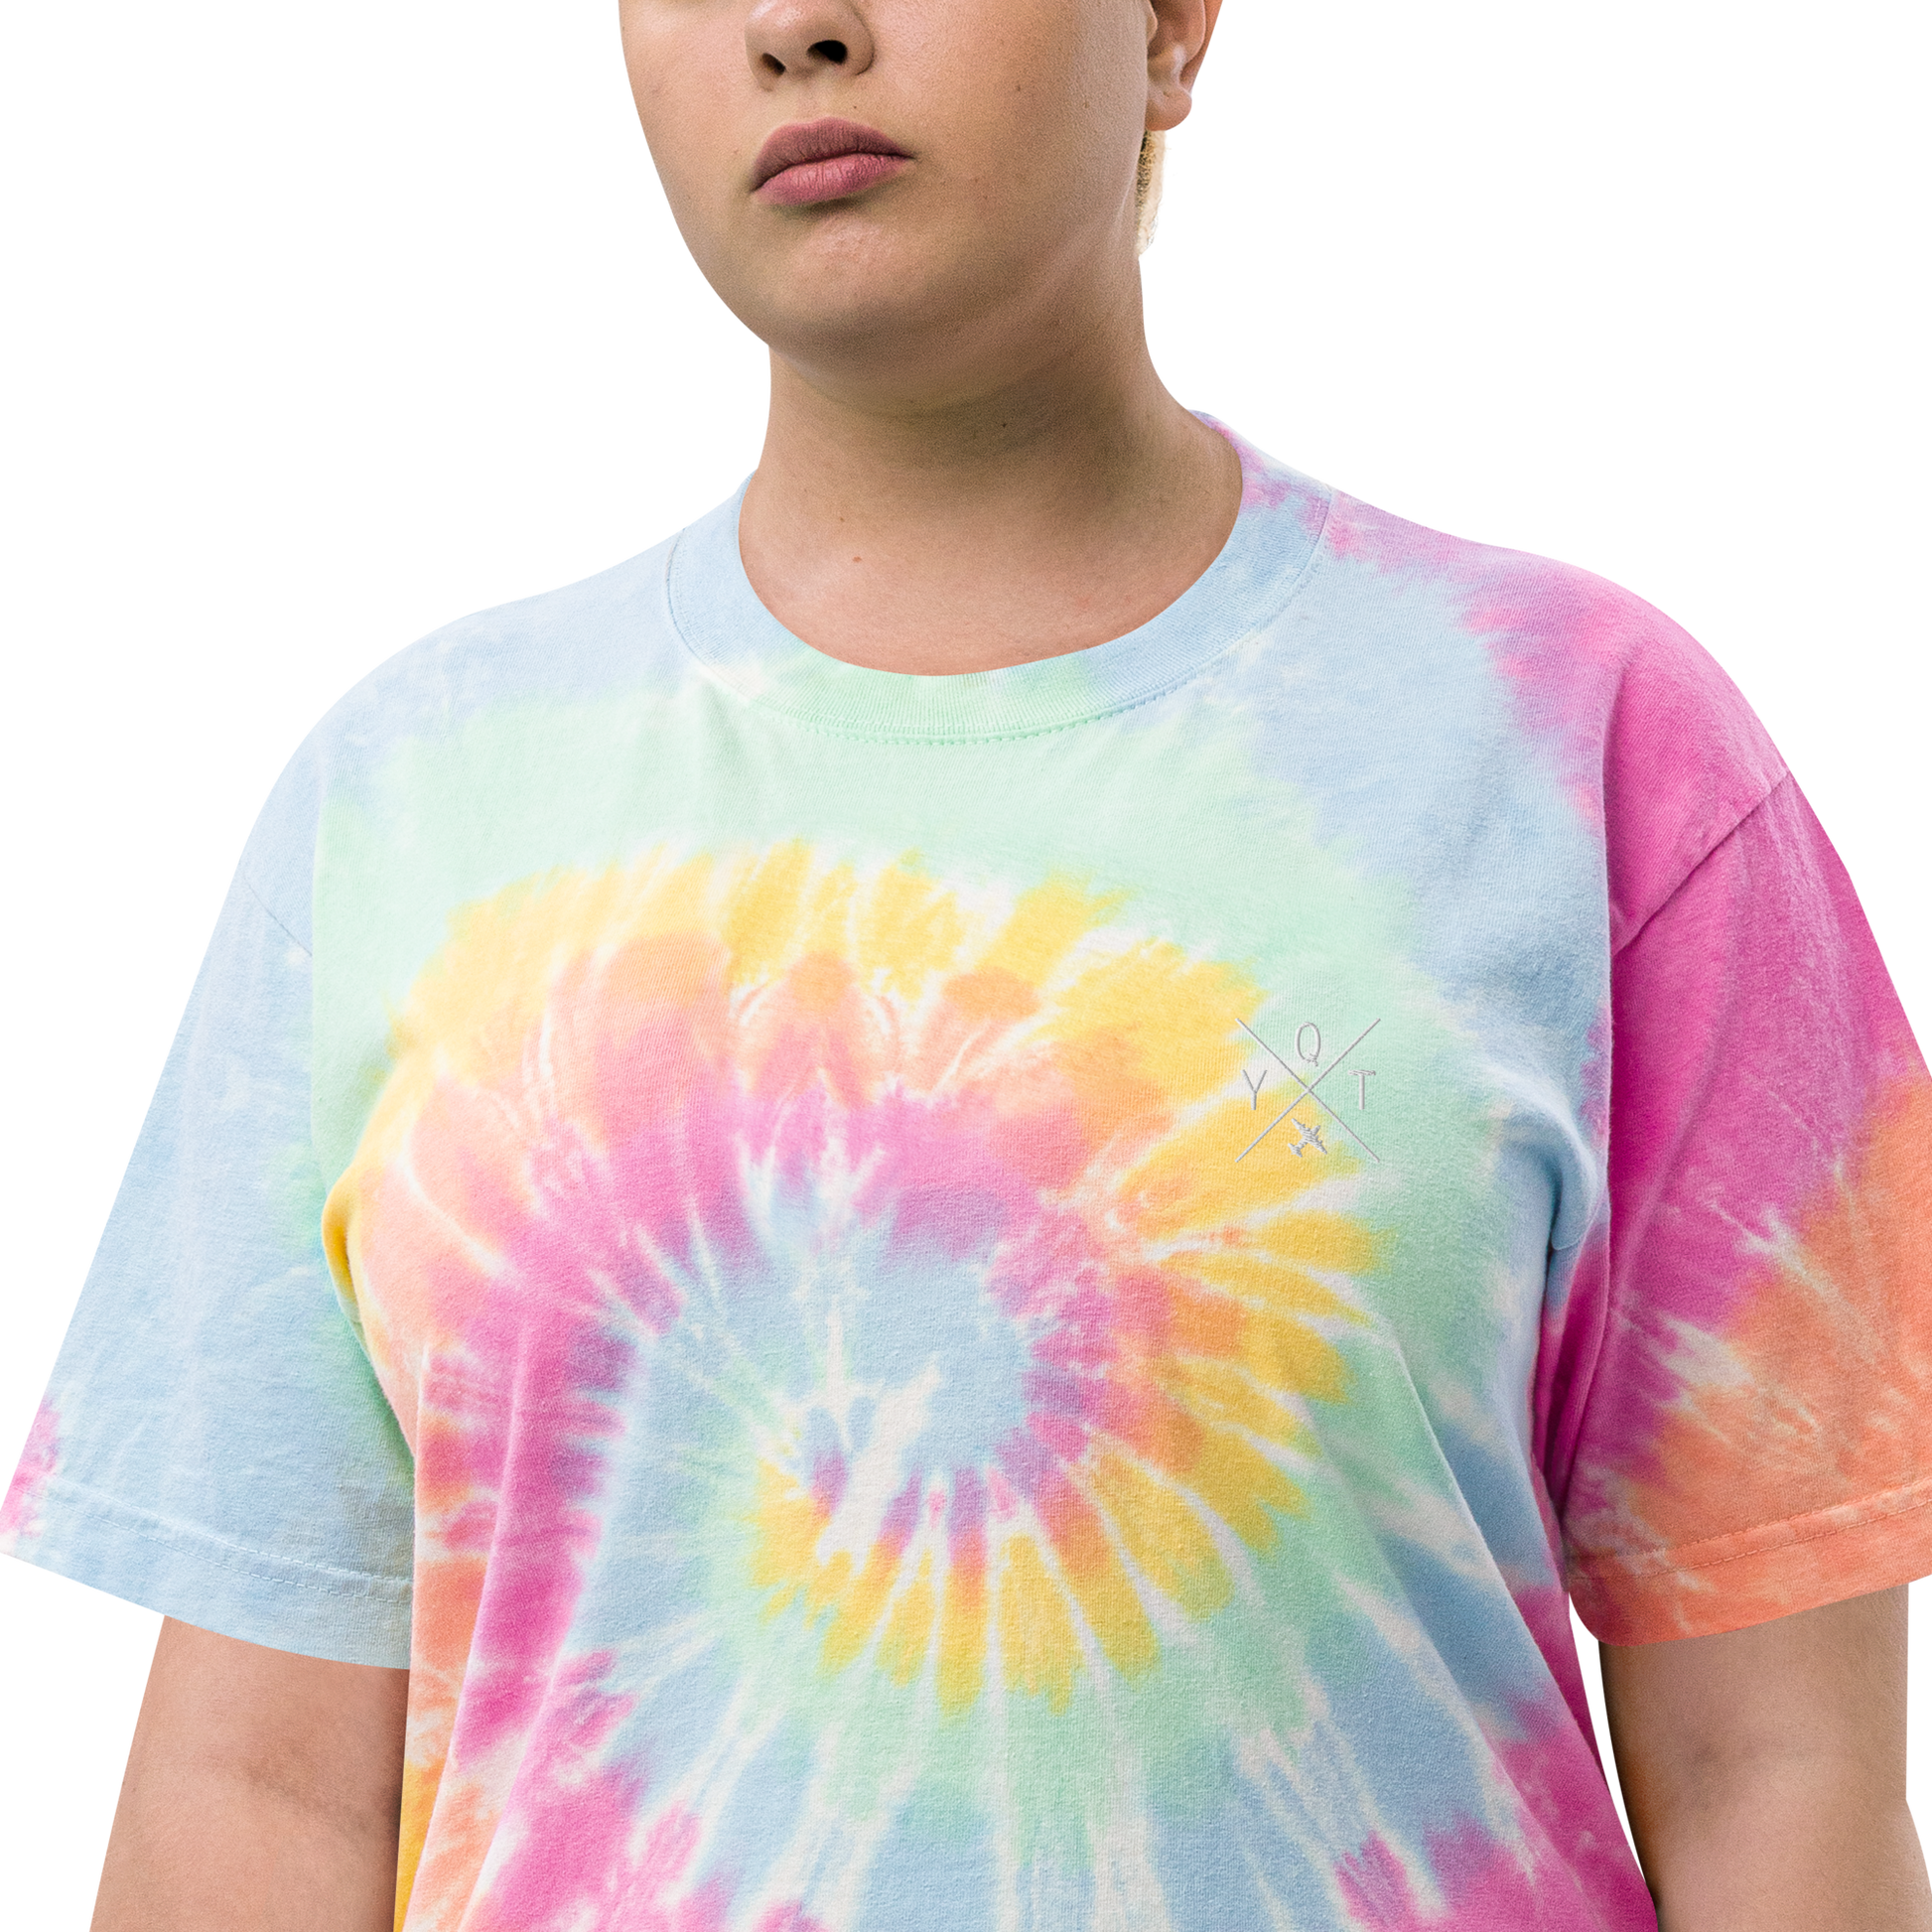 YHM Designs - YQT Thunder Bay Oversized Tie-Dye T-Shirt - Crossed-X Design with Airport Code and Vintage Propliner - White Embroidery - Image 13